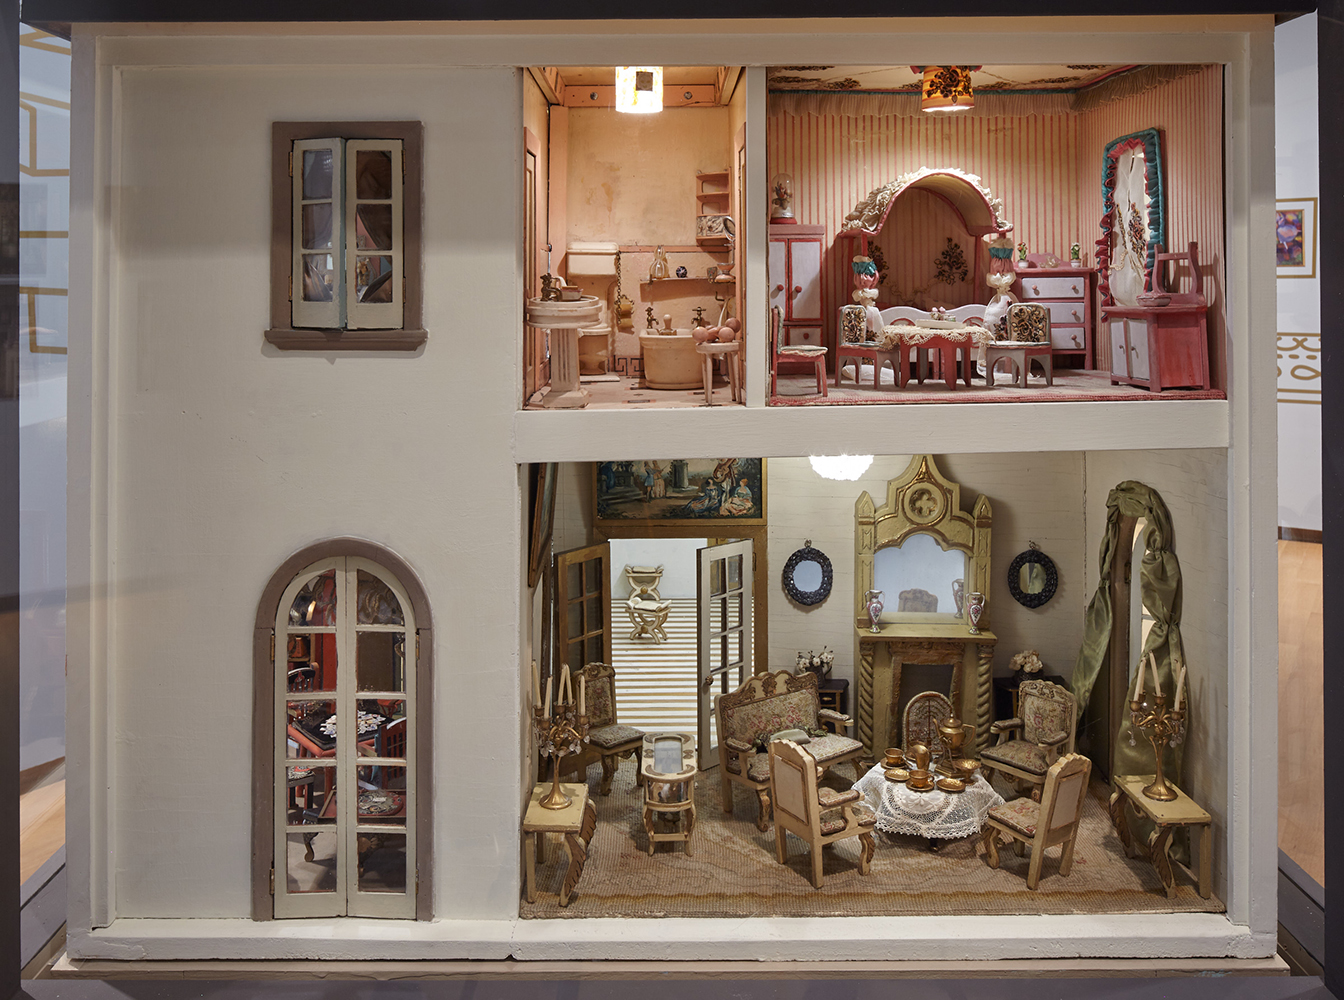 Image of the Stettheimer Dollhouse exhibition at the Museum of the City of New York